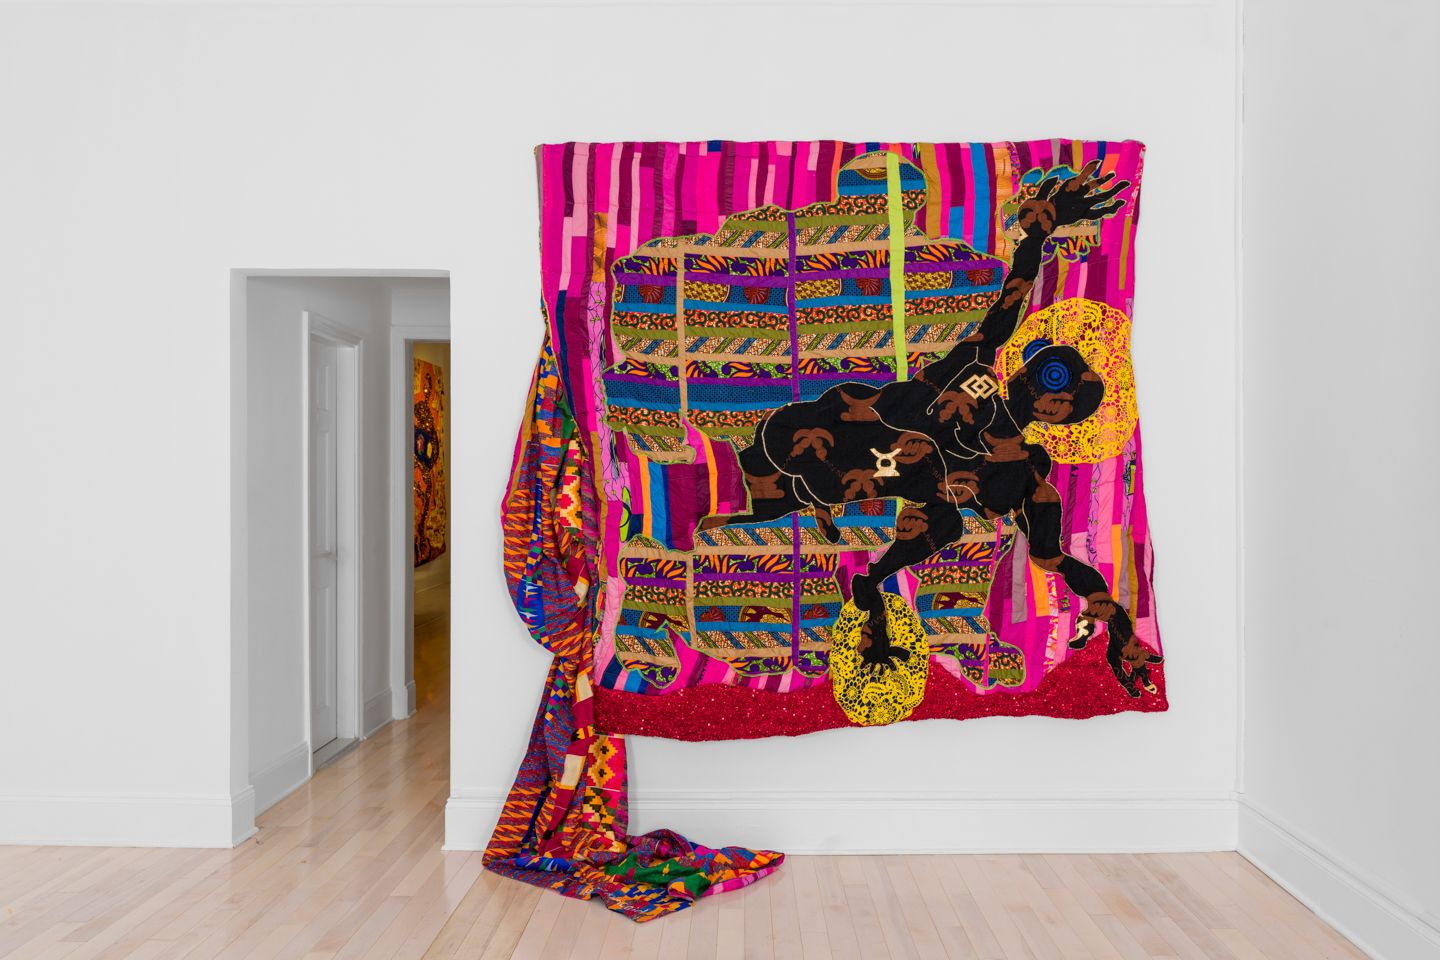 A-large-scale-quilt-with-a-black-figure-stretching-its-hands-outward-against-a-mainly-pink-and-red-and-purple-background.